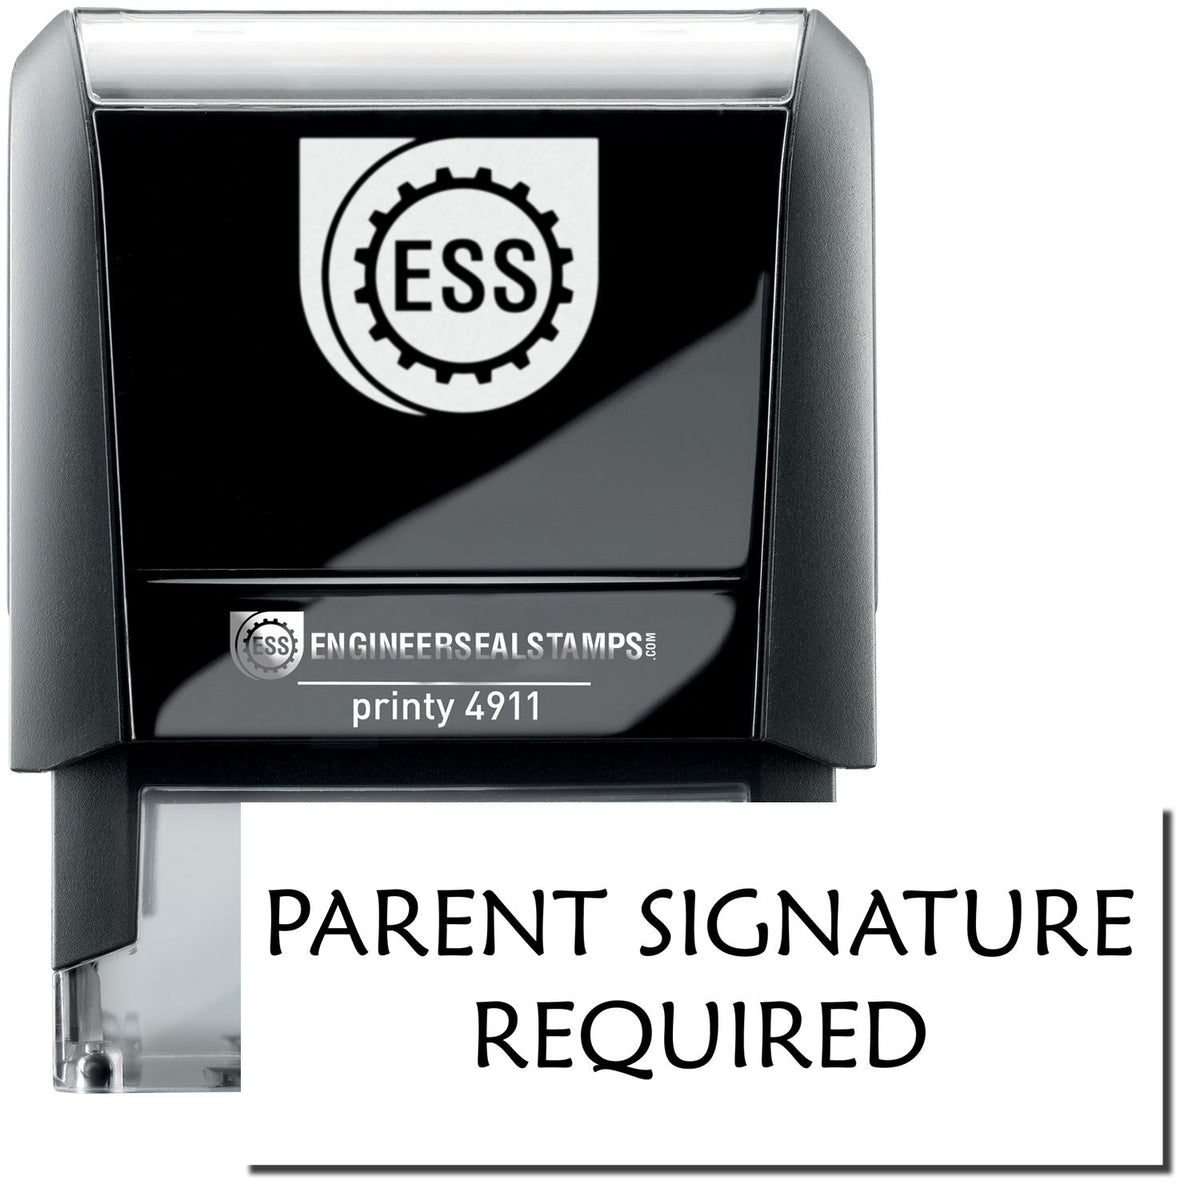 A self-inking stamp with a stamped image showing how the text &quot;PARENT SIGNATURE REQUIRED&quot; is displayed after stamping.